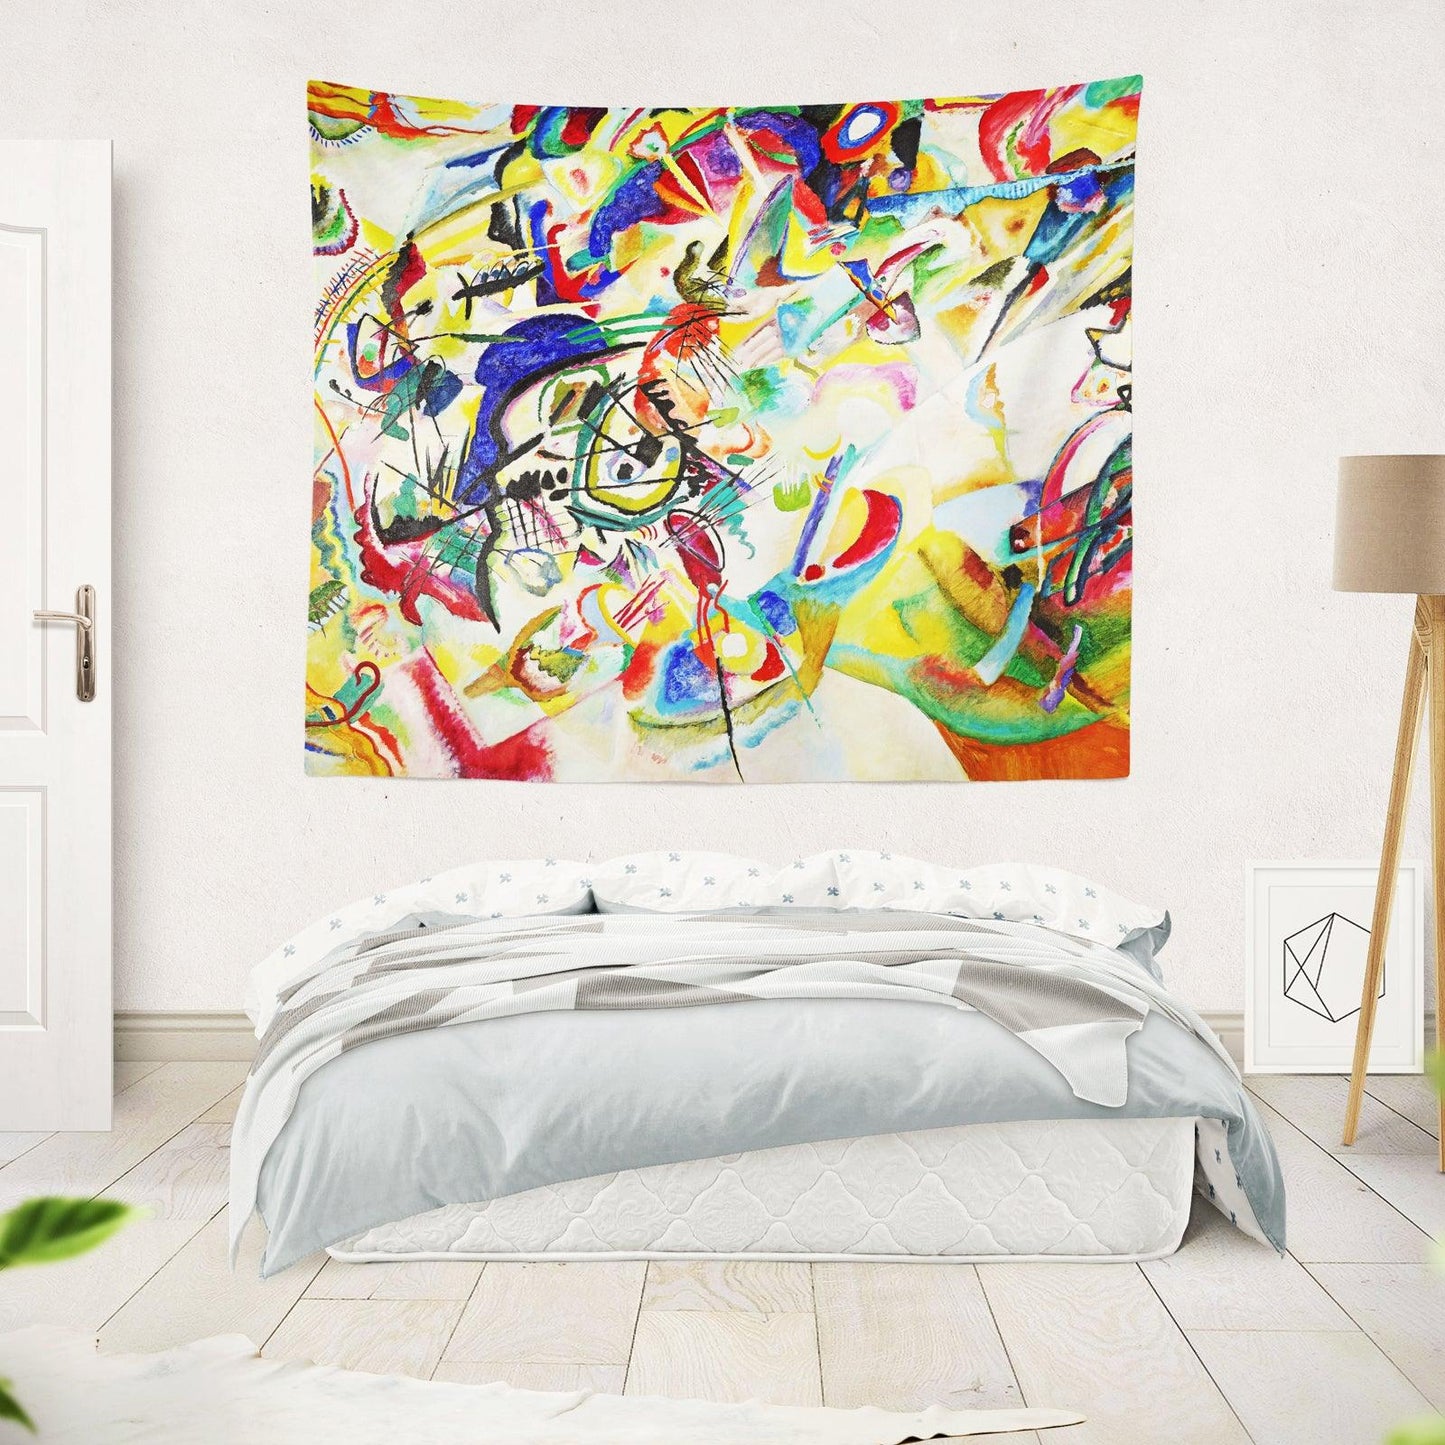 Art Abstract Tapestry (Composition VII by Wassily Kandinsky) - Berkin Arts